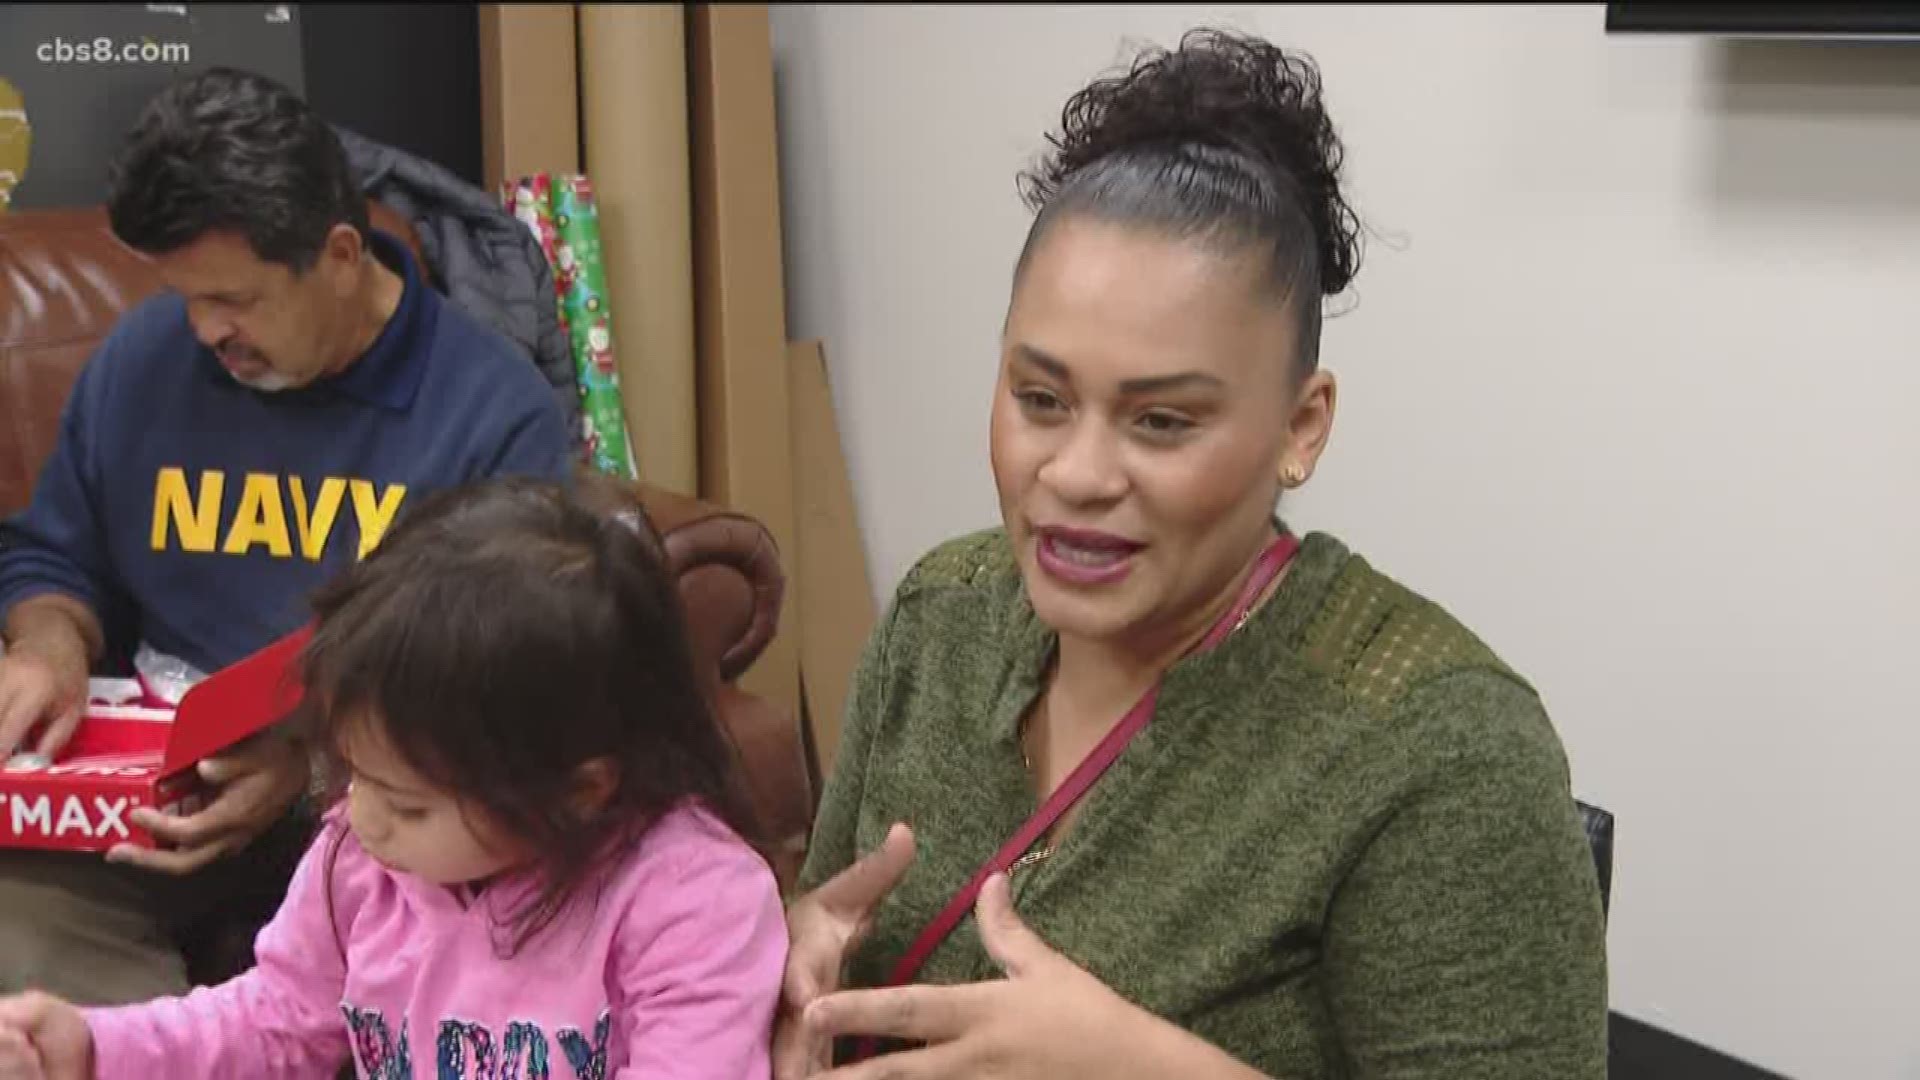 The Rock Church took the stress out of the holidays for a San Diego military spouse and her four kids after giving hundreds of gifts to 20,000 kids last week